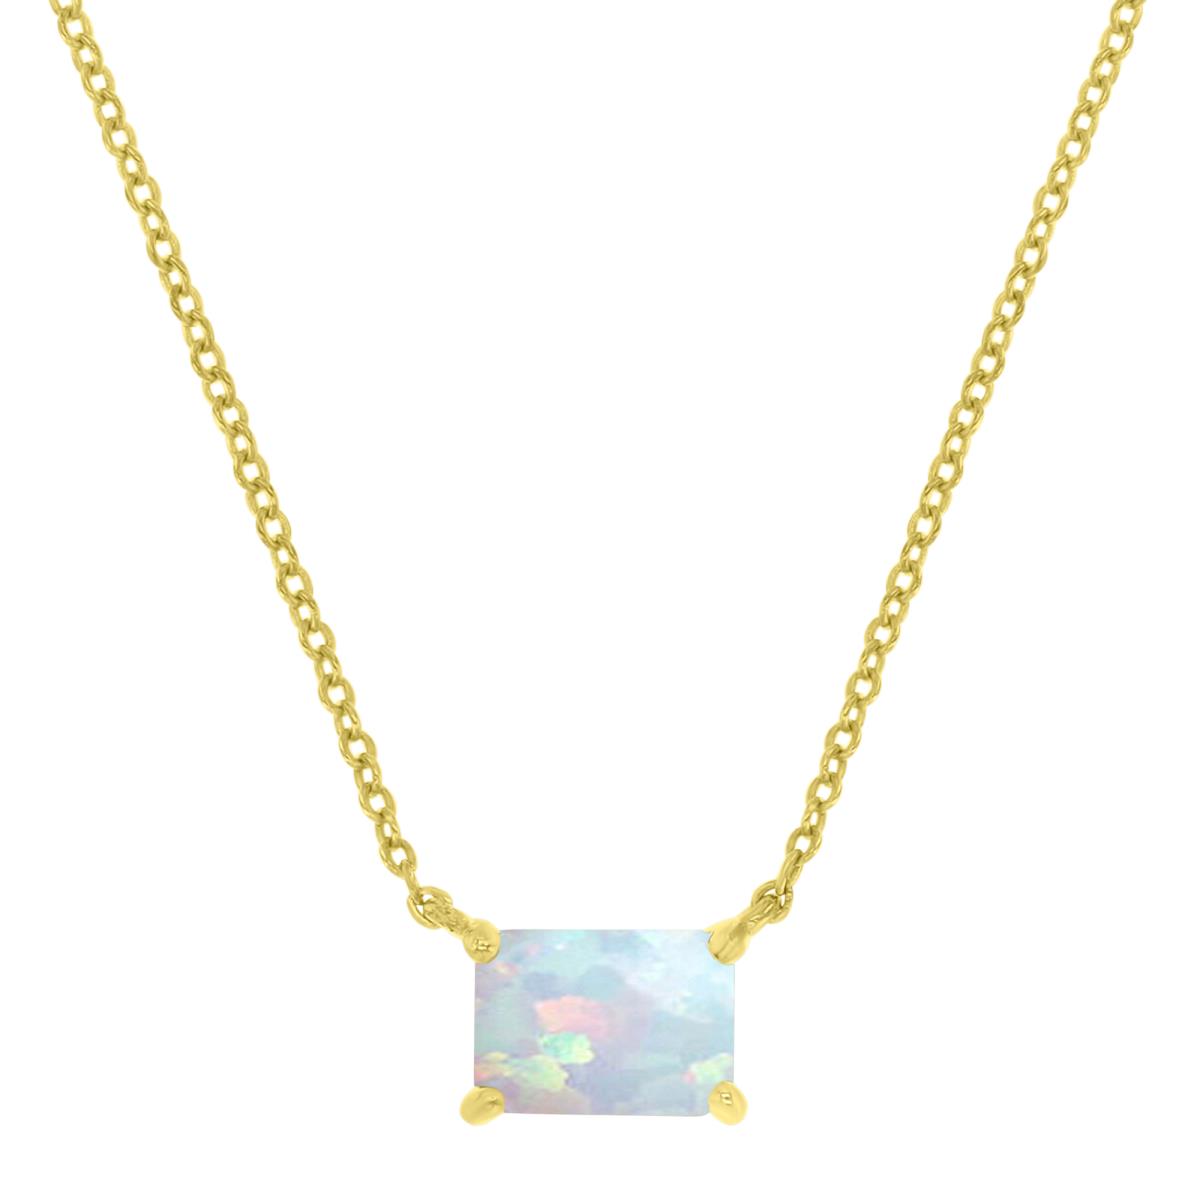 14K Yellow Gold 7x5mm  (1 ctw) Emerald Cut Created Opal 16+2" Solitaire Necklace